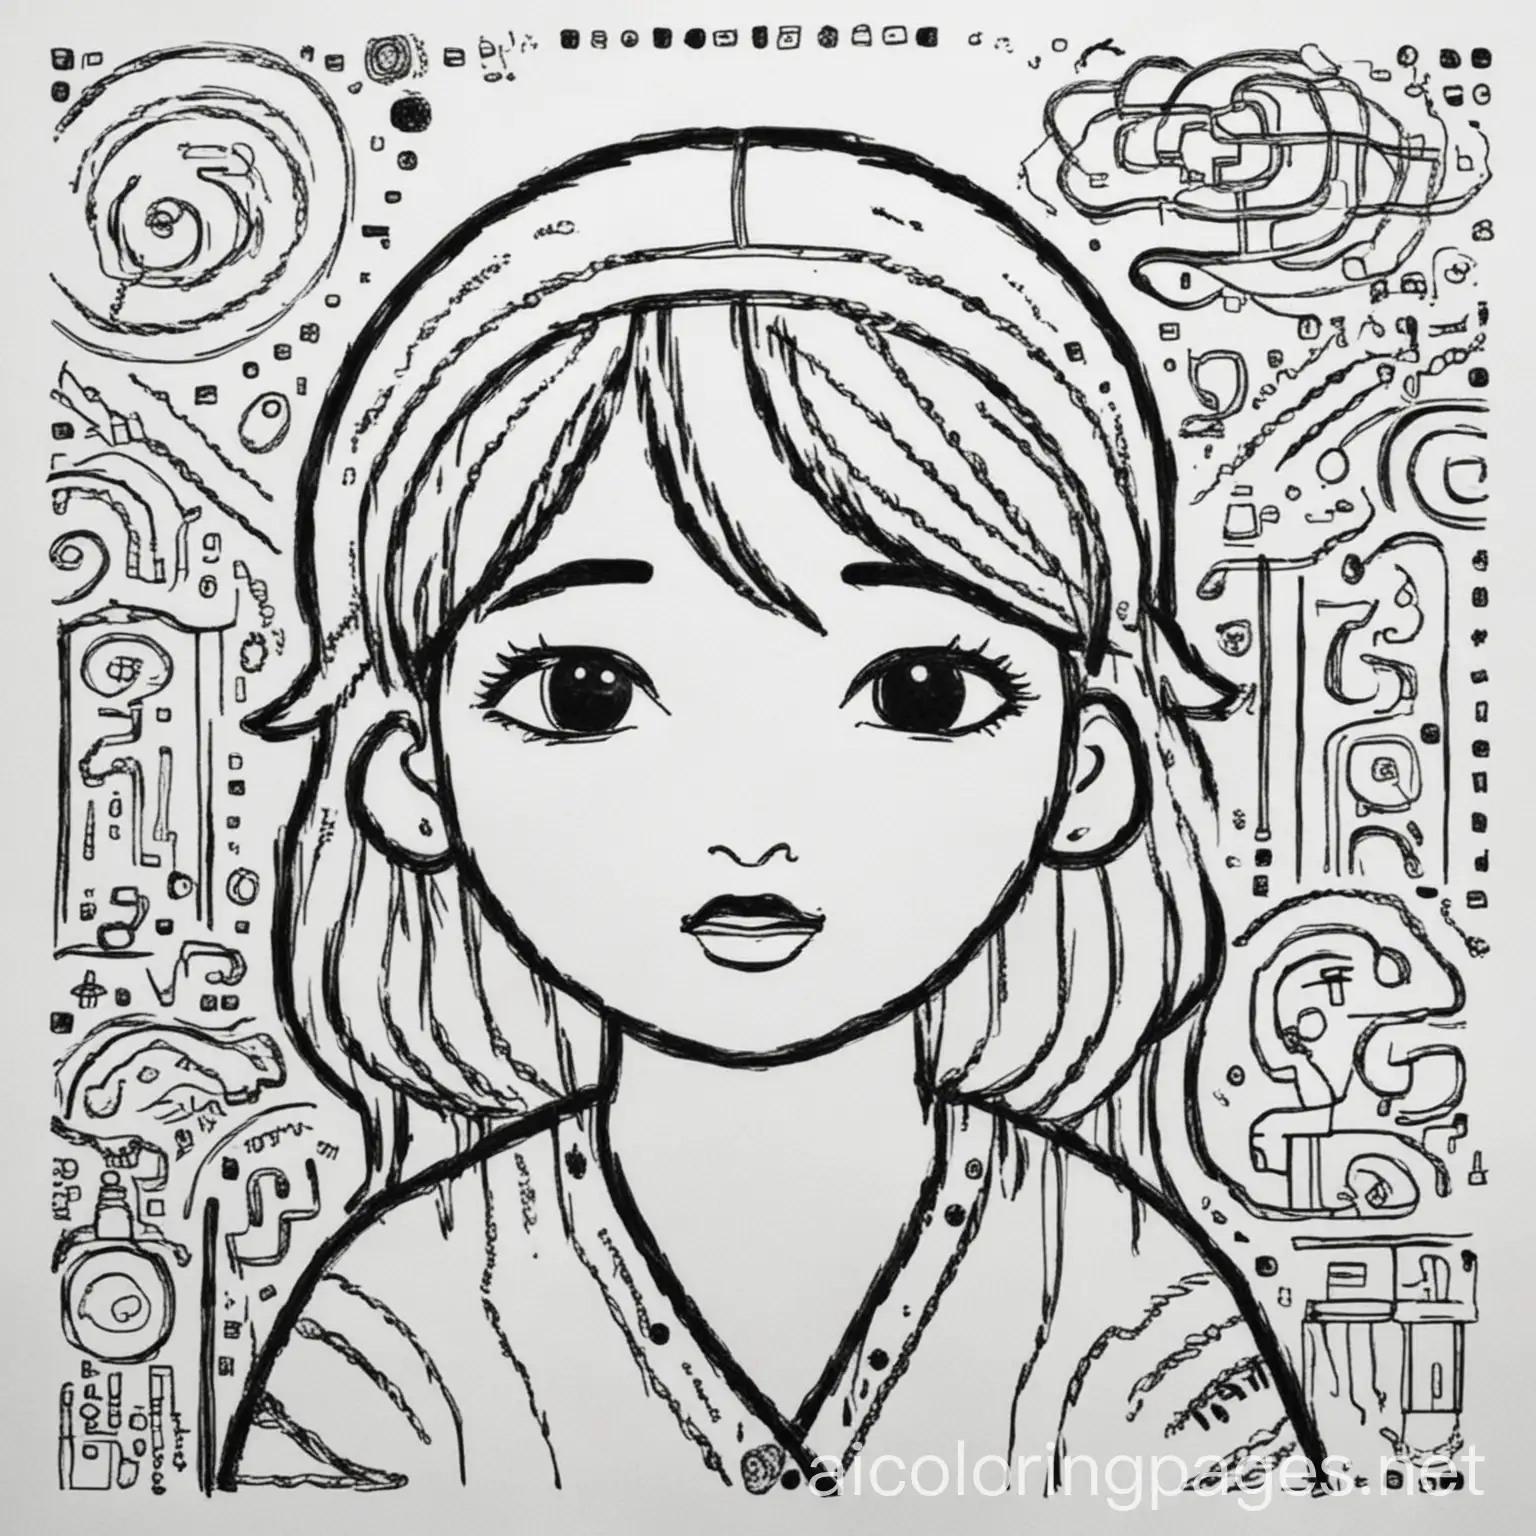 show human culture in a black and white coloring page


, Coloring Page, black and white, line art, white background, Simplicity, Ample White Space. The background of the coloring page is plain white to make it easy for young children to color within the lines. The outlines of all the subjects are easy to distinguish, making it simple for kids to color without too much difficulty